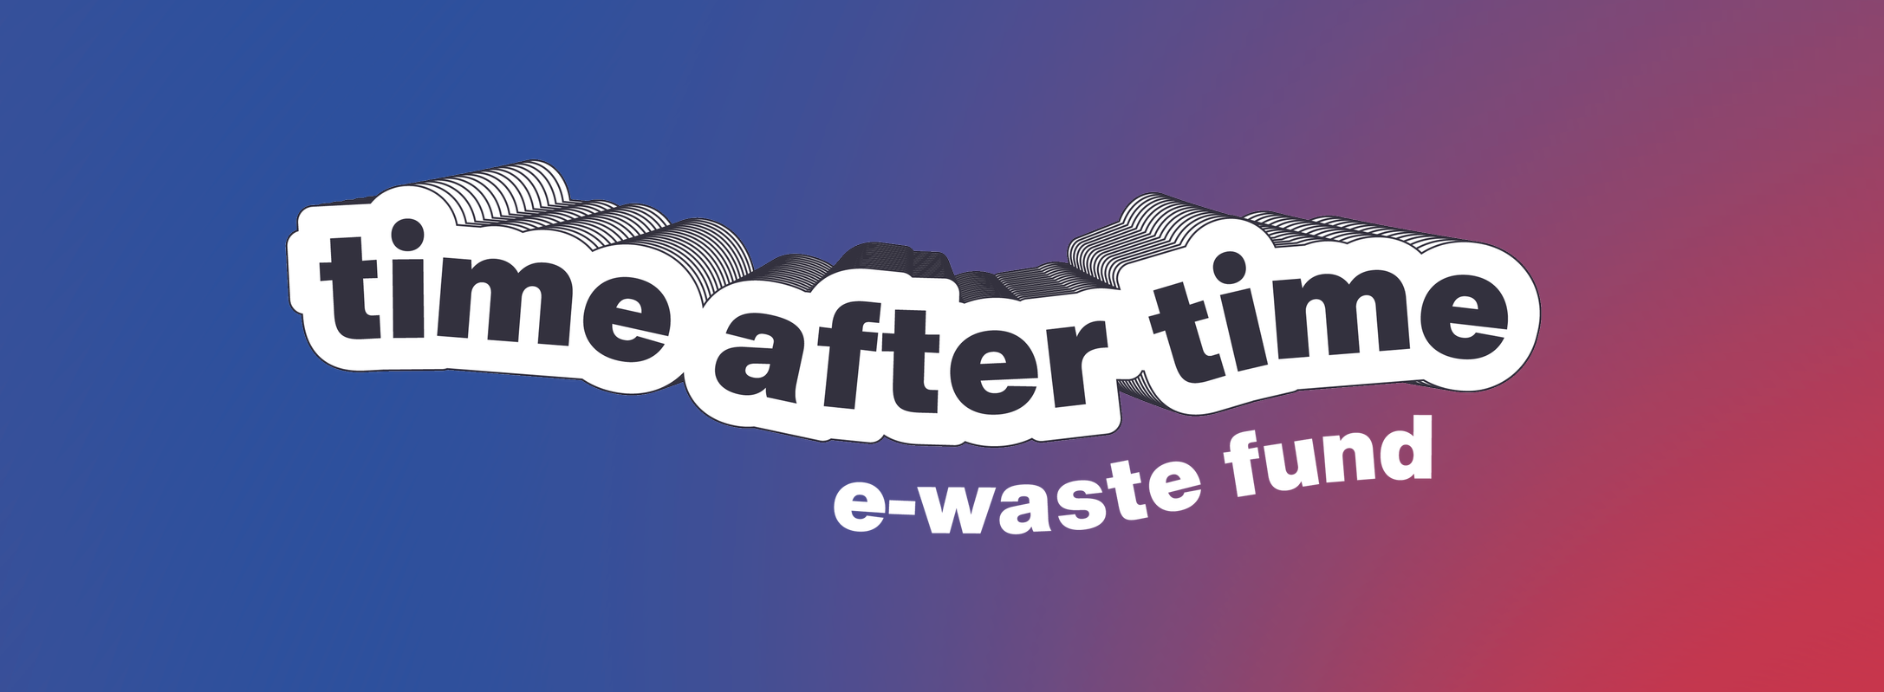 time after time e-waste fund